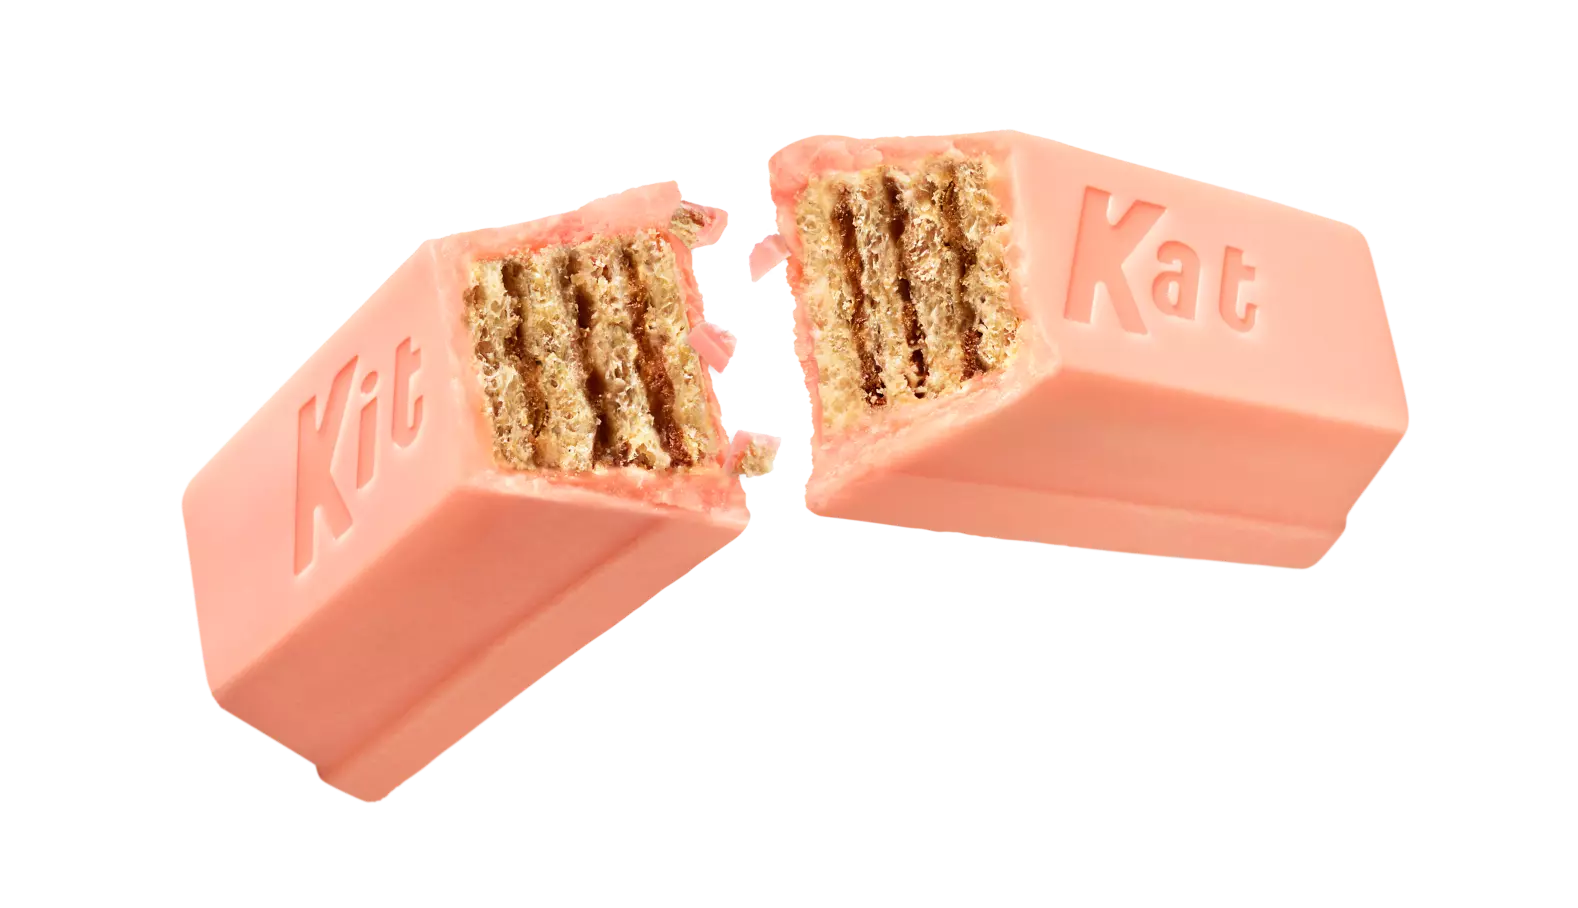 KIT KAT® Valentine's Raspberry Creme Miniatures Candy Bars, 8.4 oz bag - Out of Package